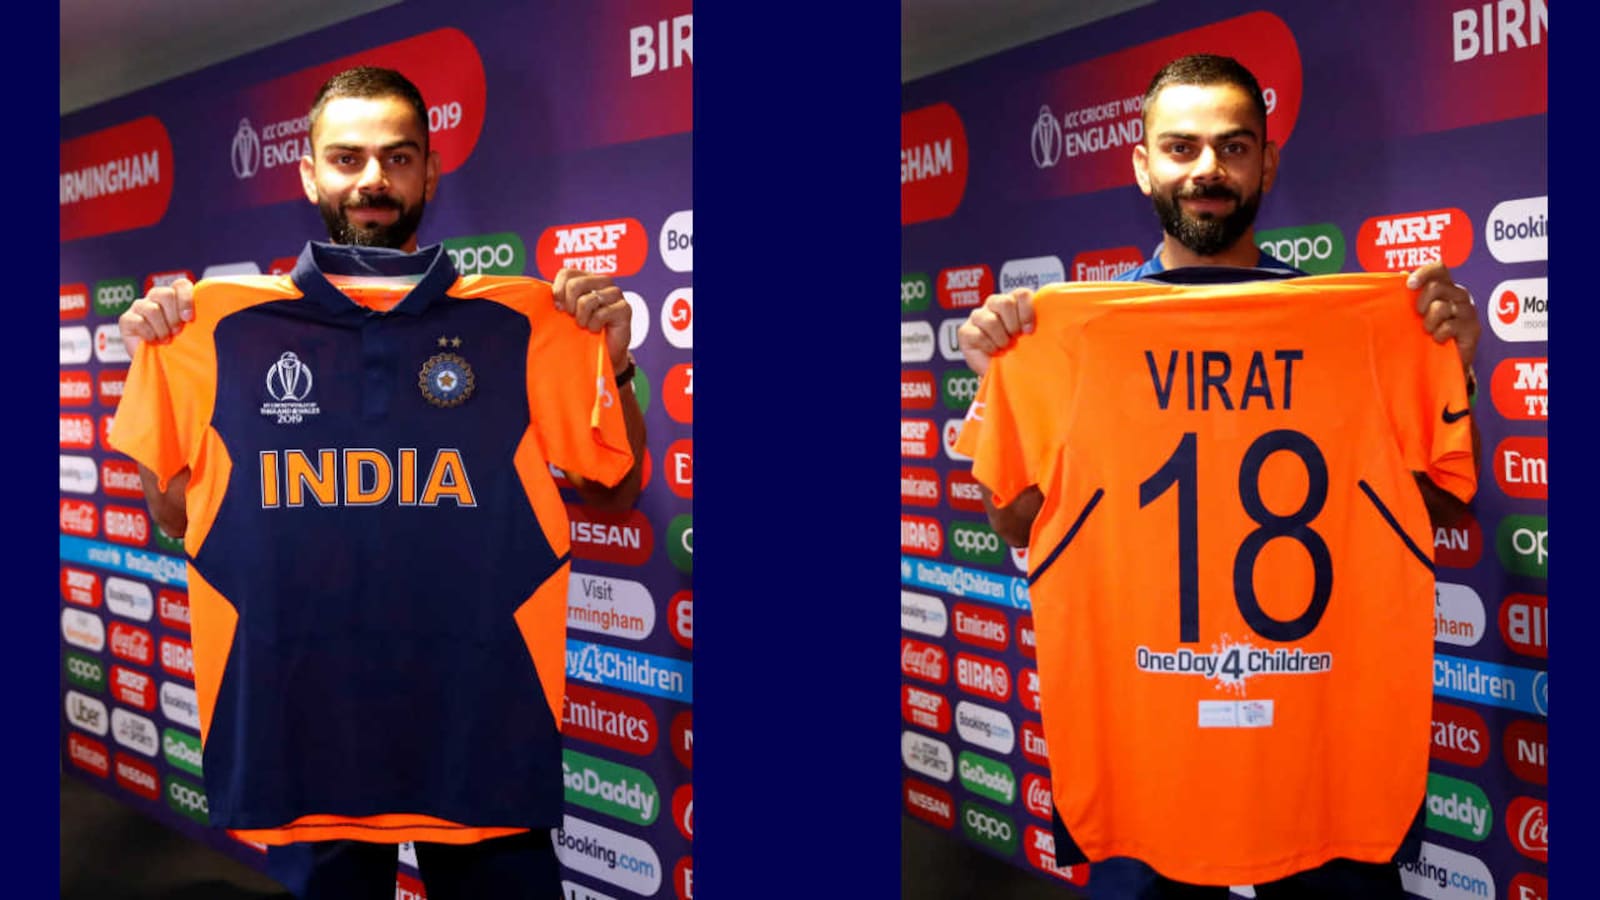 Cricket World Cup 2019: Orange jersey is one-off, blue remains our